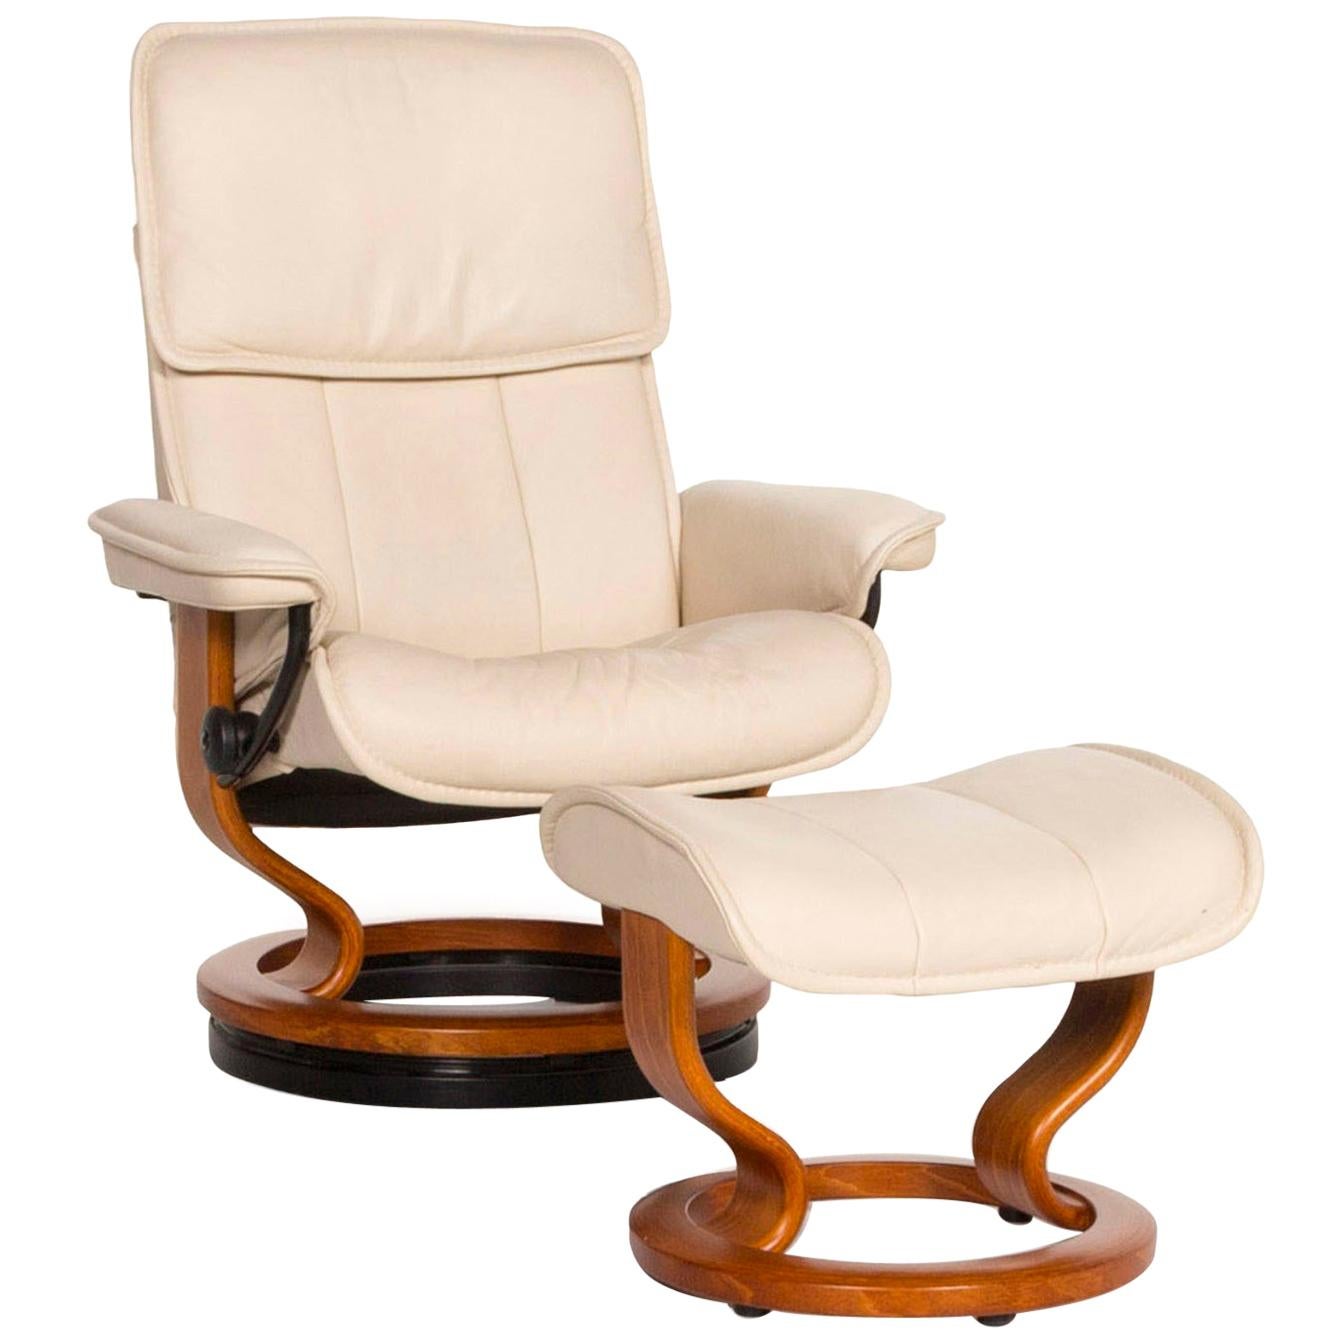 Stressless Leather Armchair Cream Relax Function Function